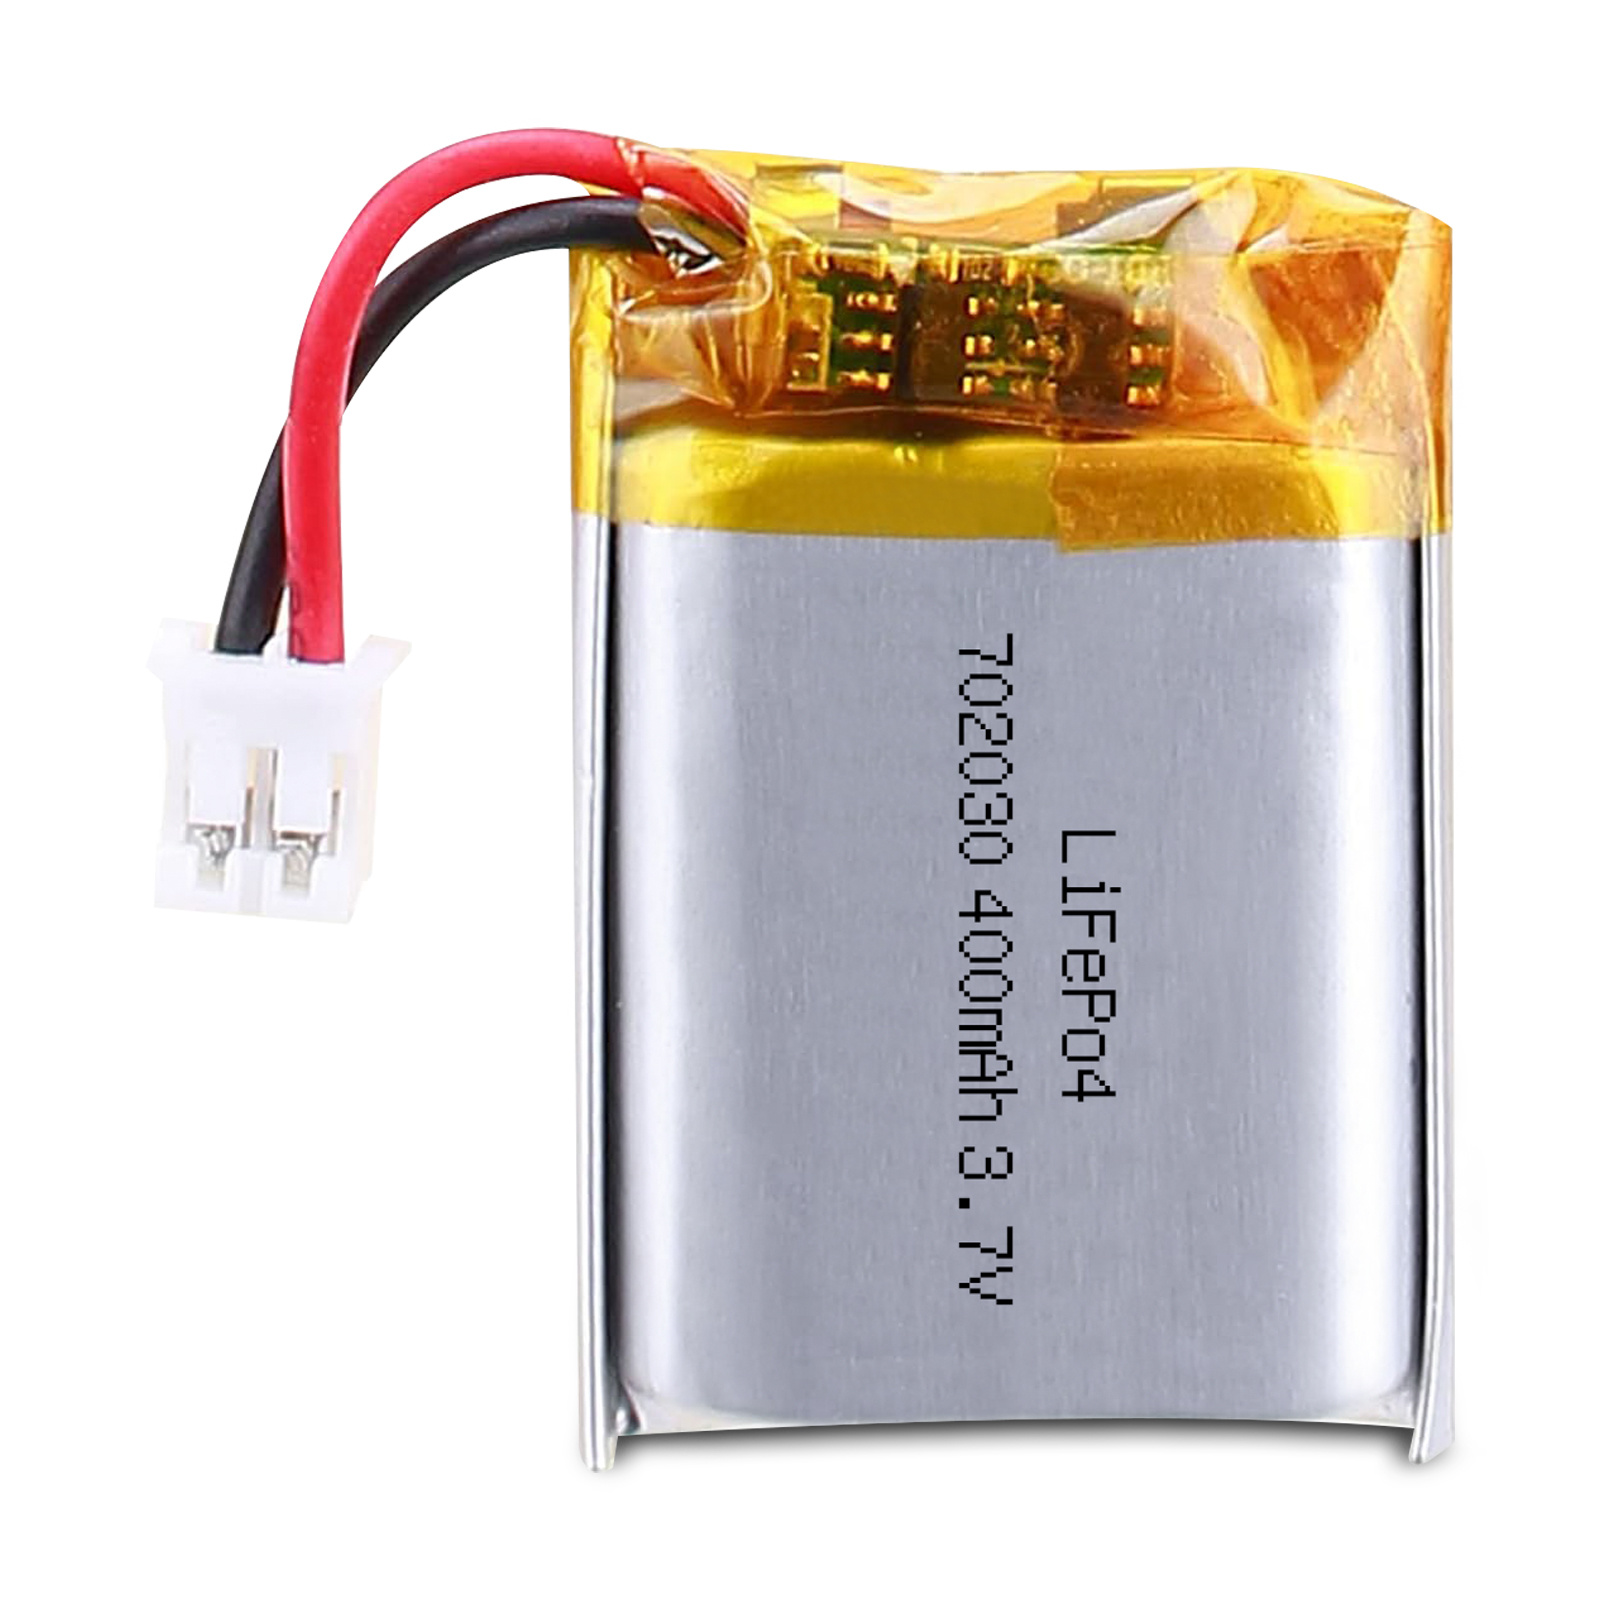 702030 3.7v 300mah lifepo4 battery with JST Connector for portable DVD players, bluetooth devices wireless devices, dash cam